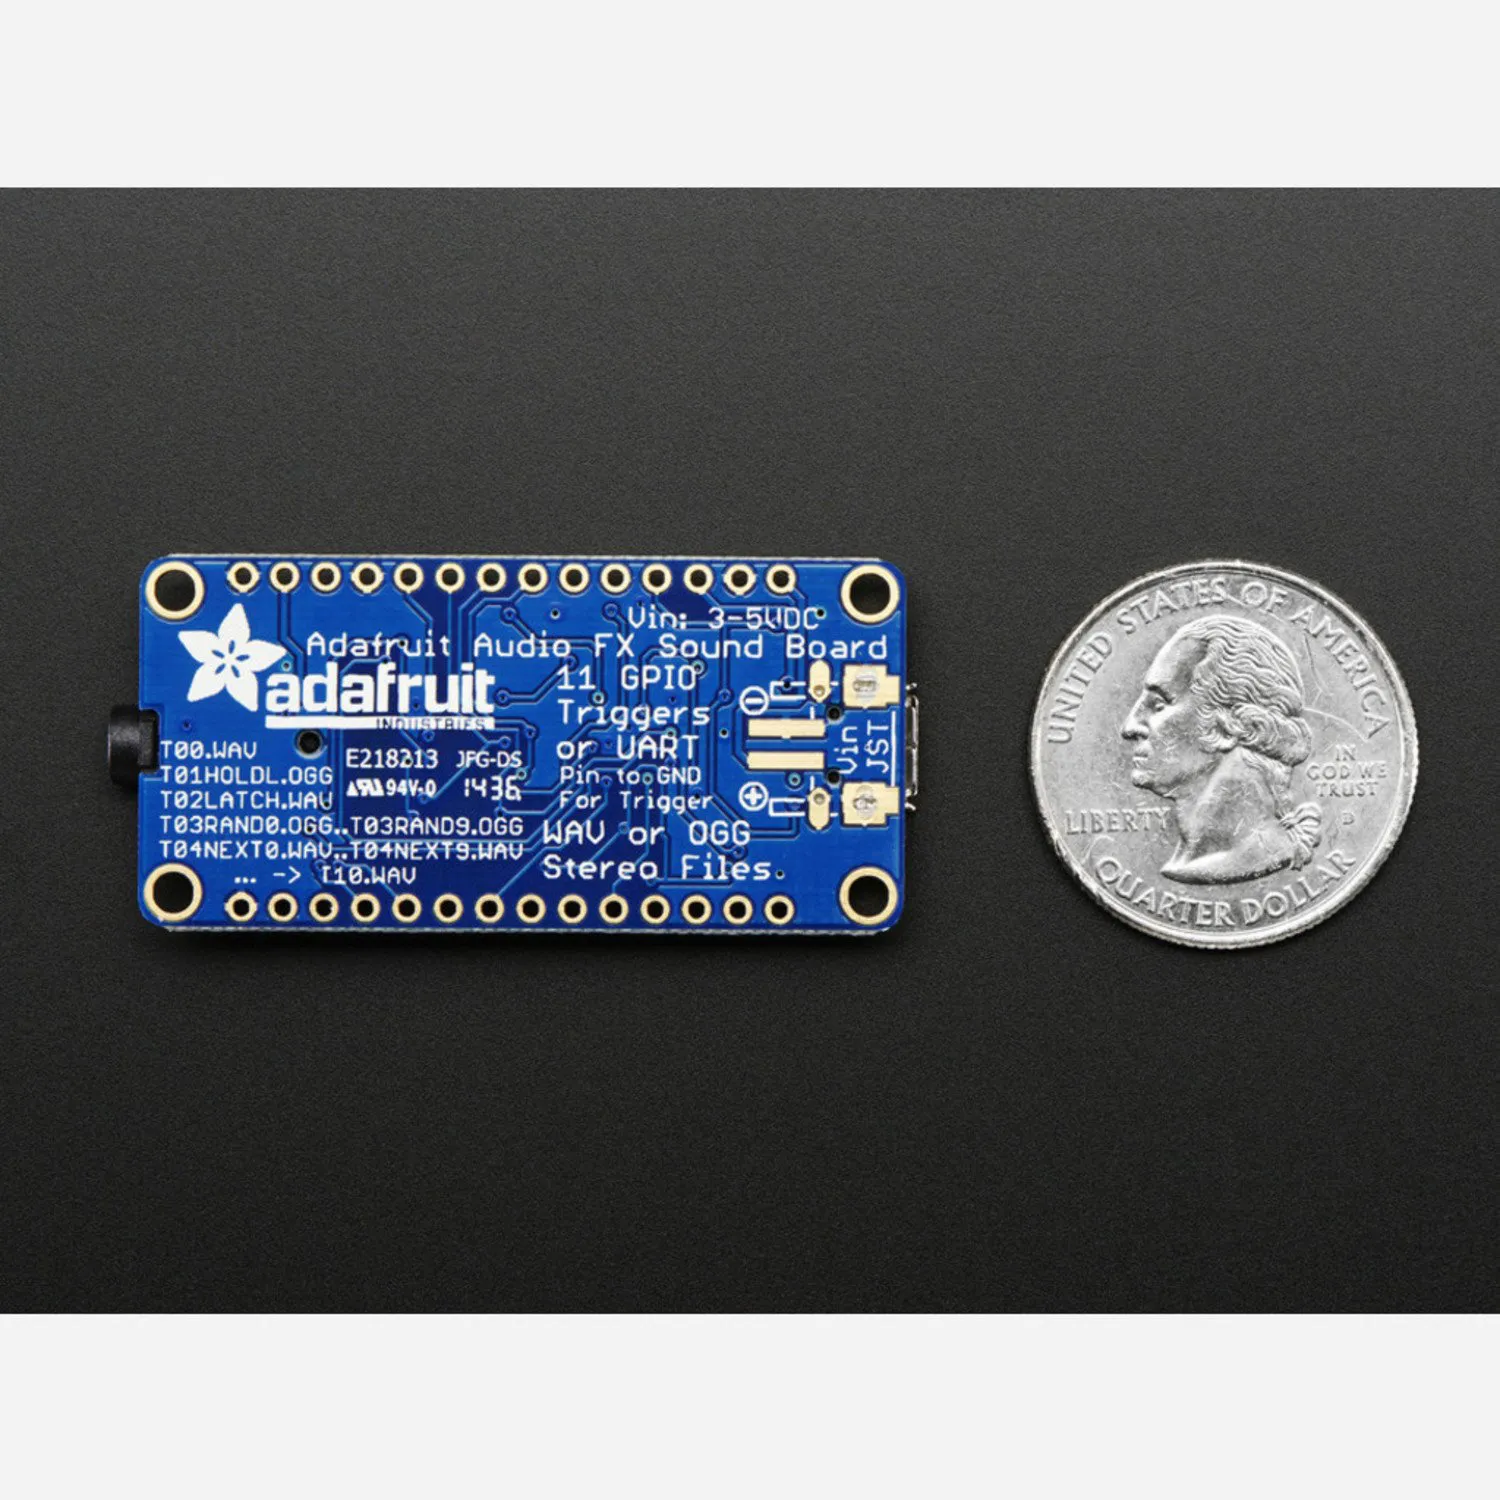 Photo of Adafruit Audio FX Sound Board - WAV/OGG Trigger - 2MB storage - Headphone out only